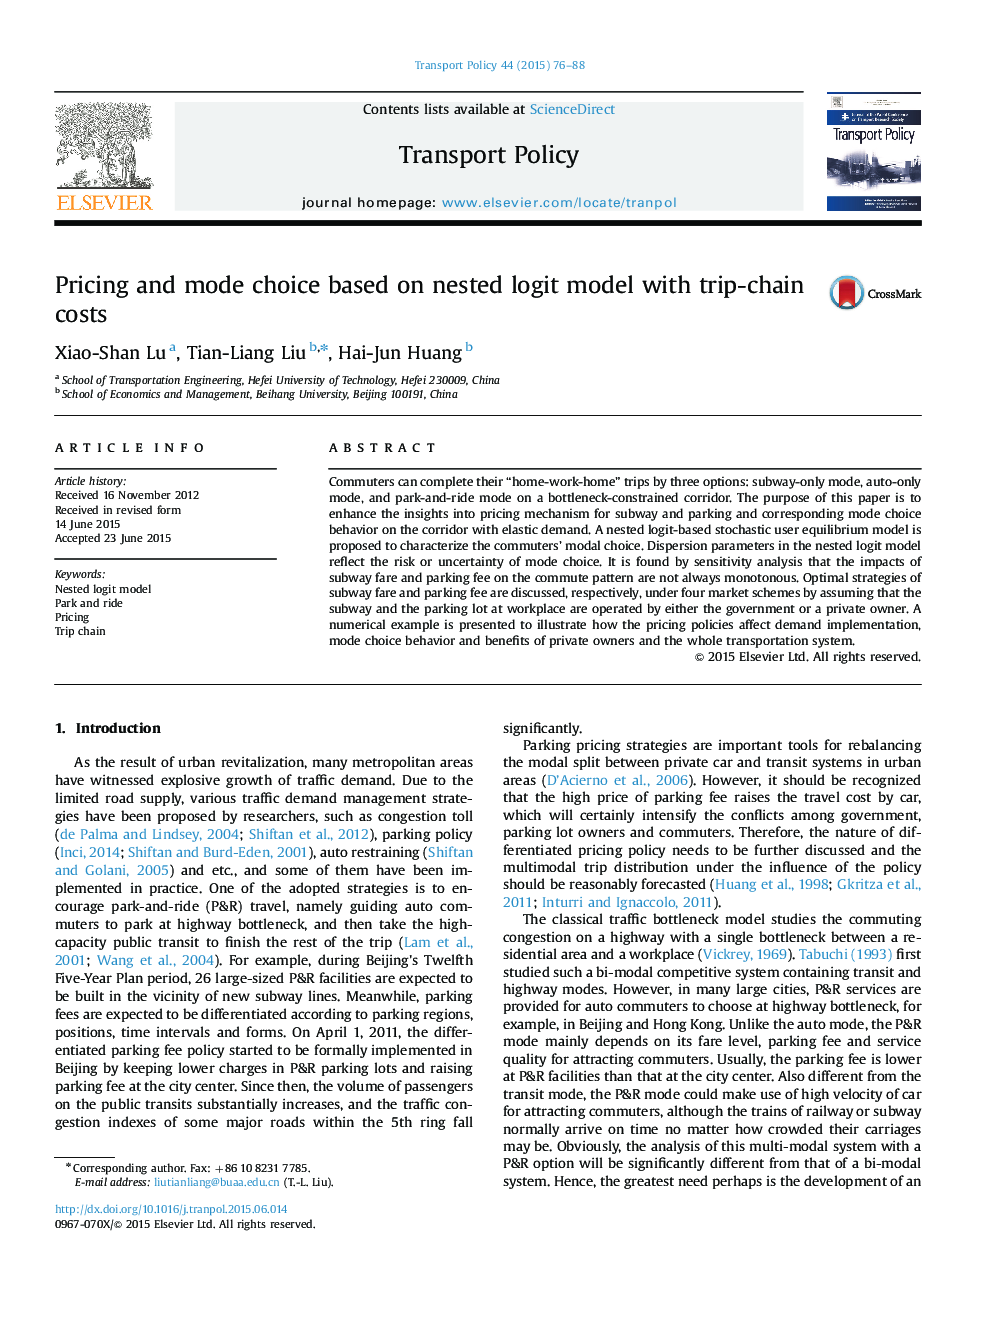 Pricing and mode choice based on nested logit model with trip-chain costs